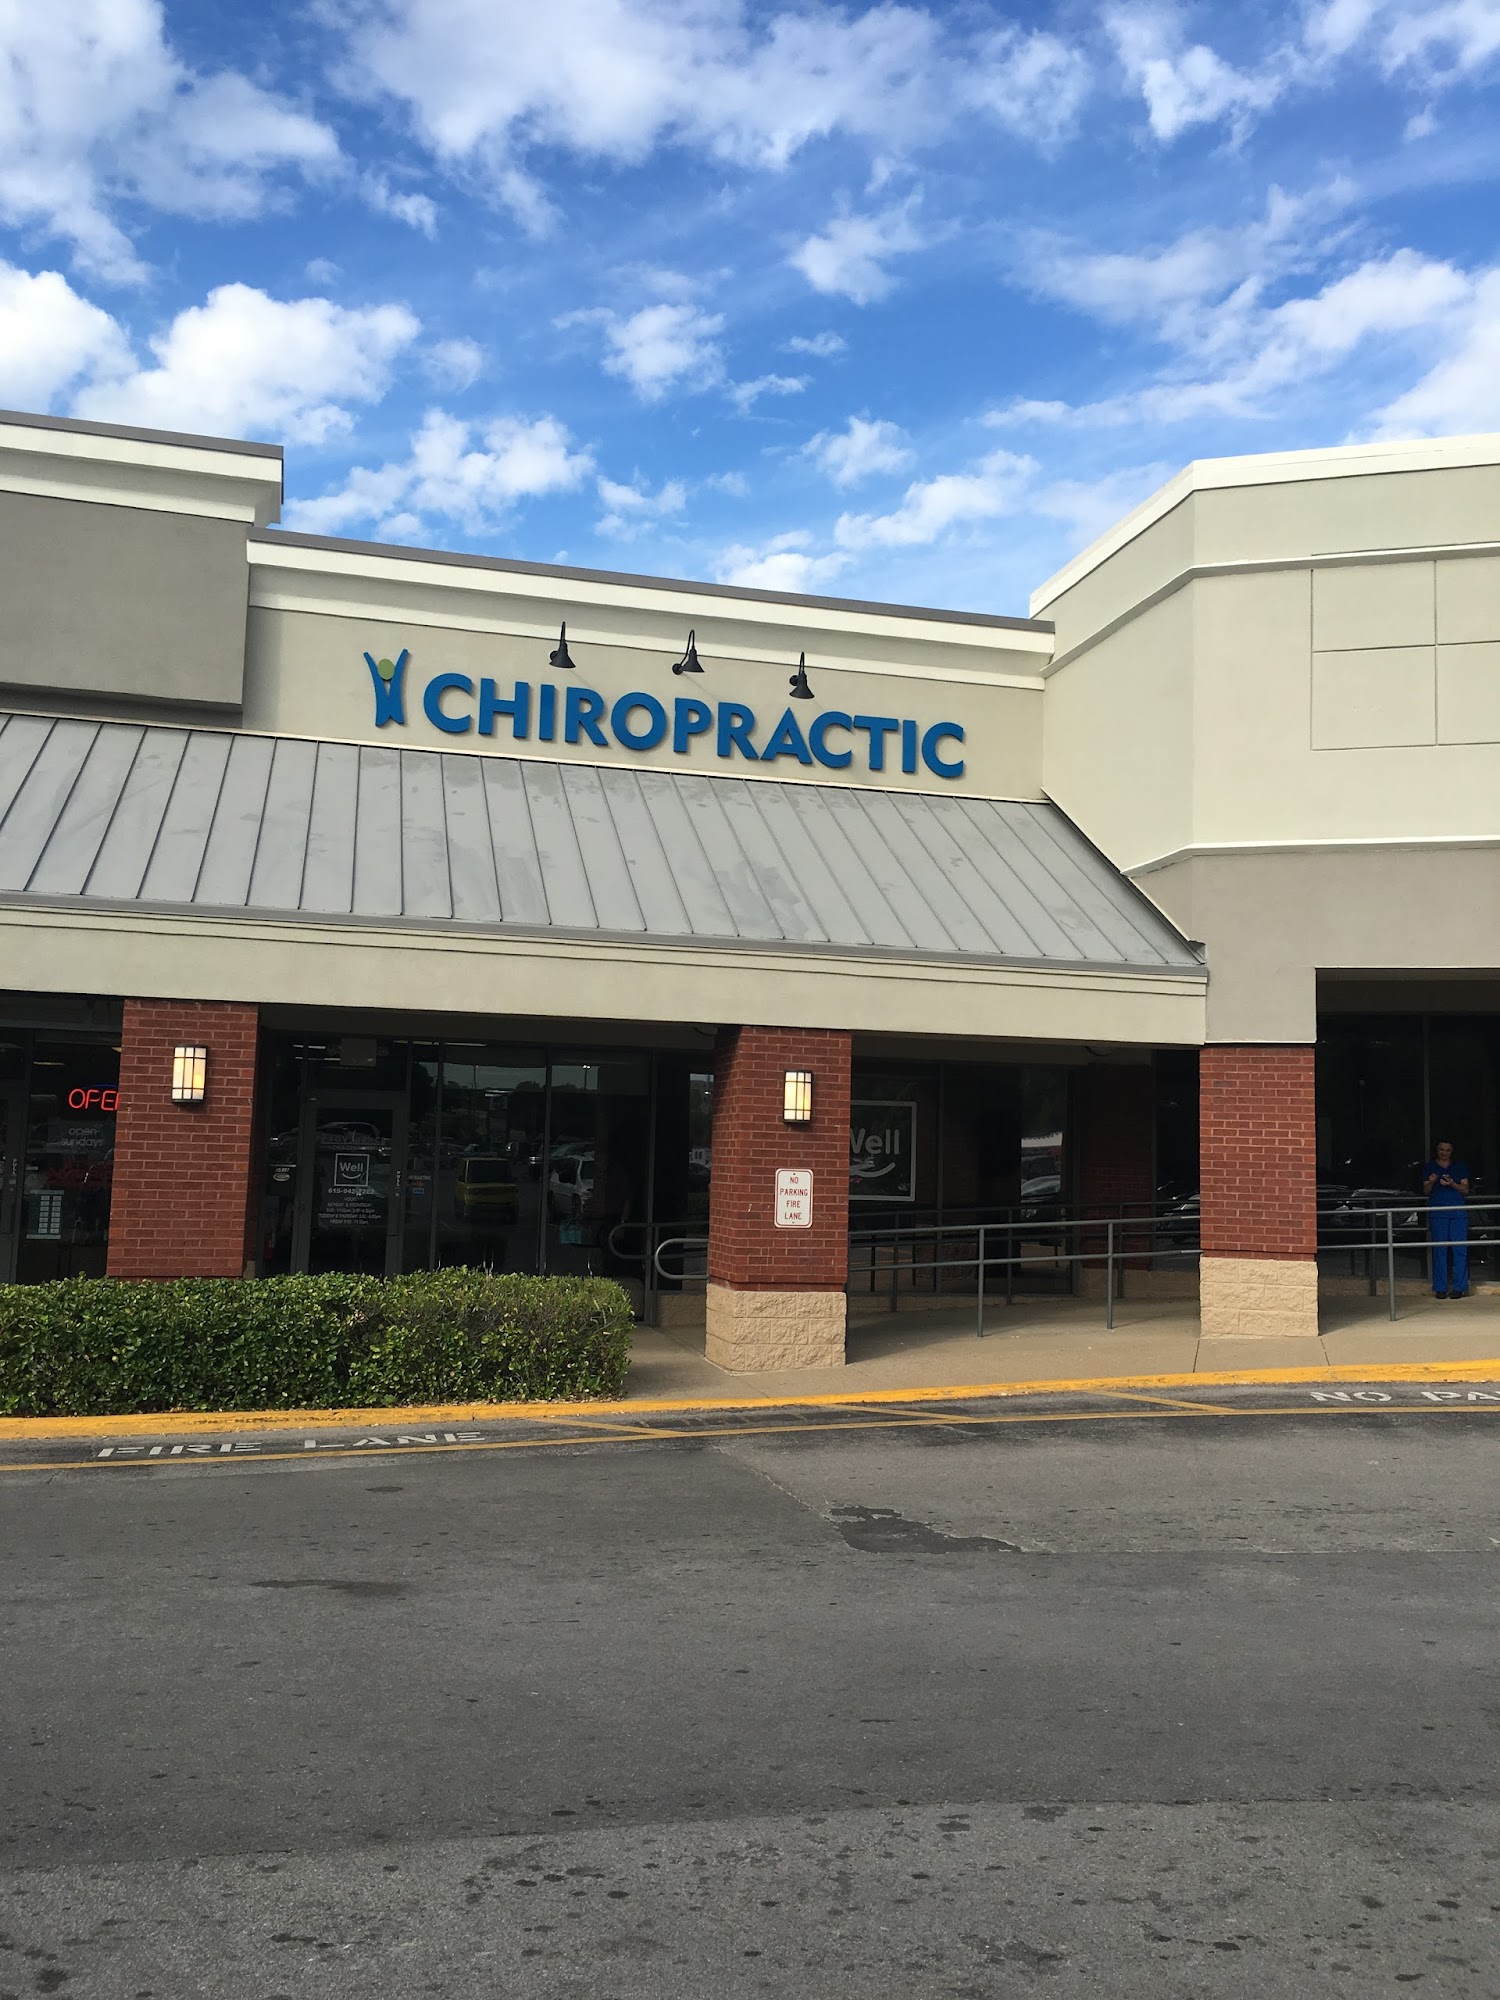 Well Health & Chiropractic Hermitage